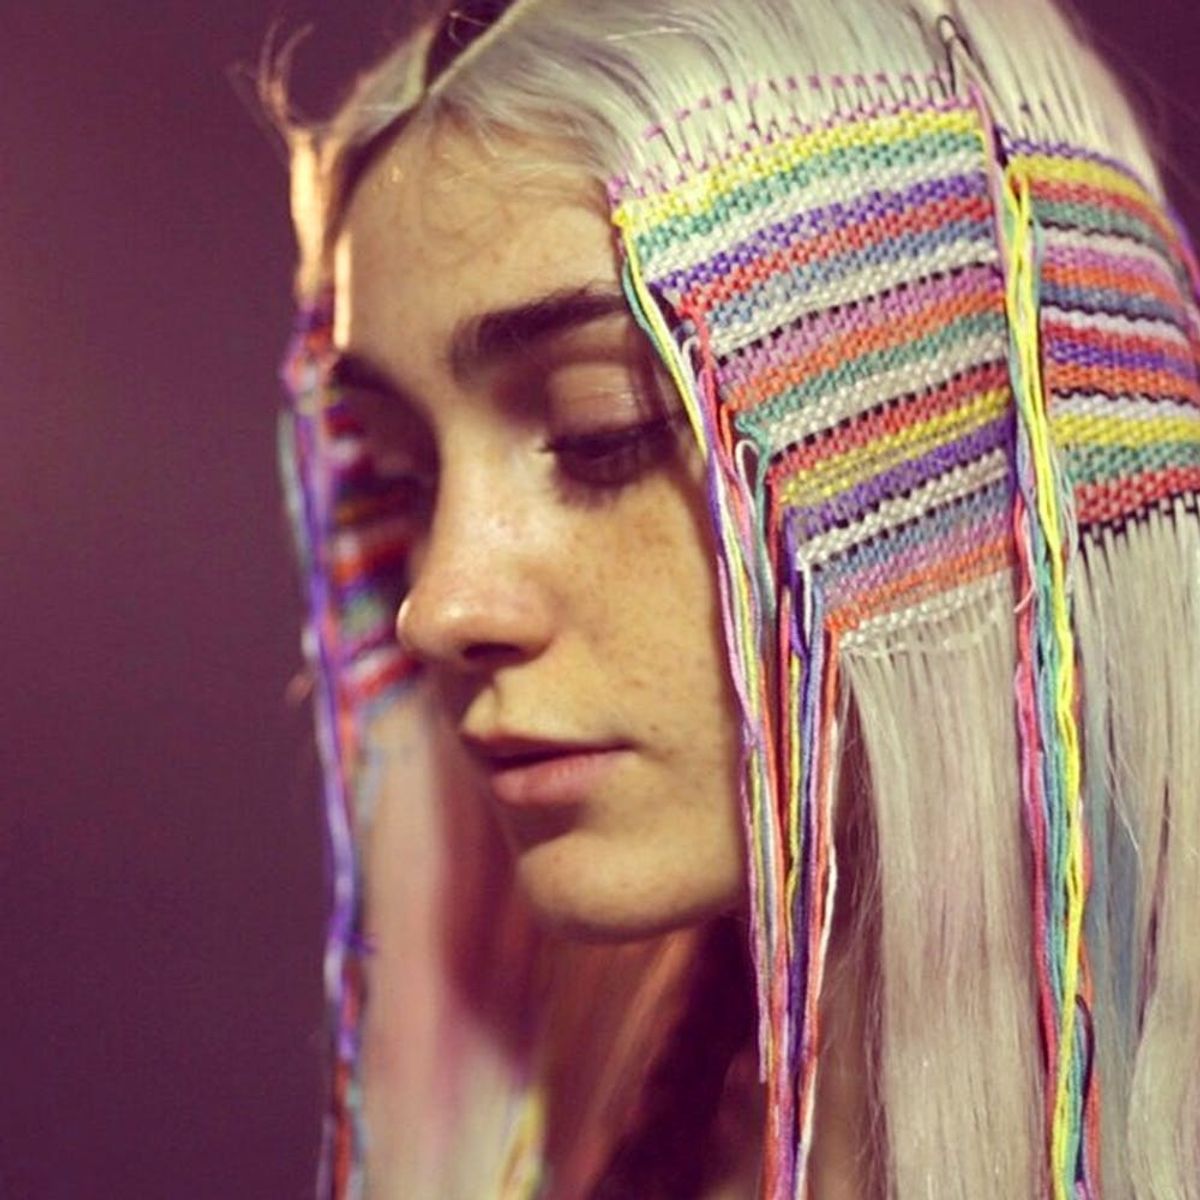 Hair Tapestries Are the Most Insanely Awesome Hair Trend of the Summer